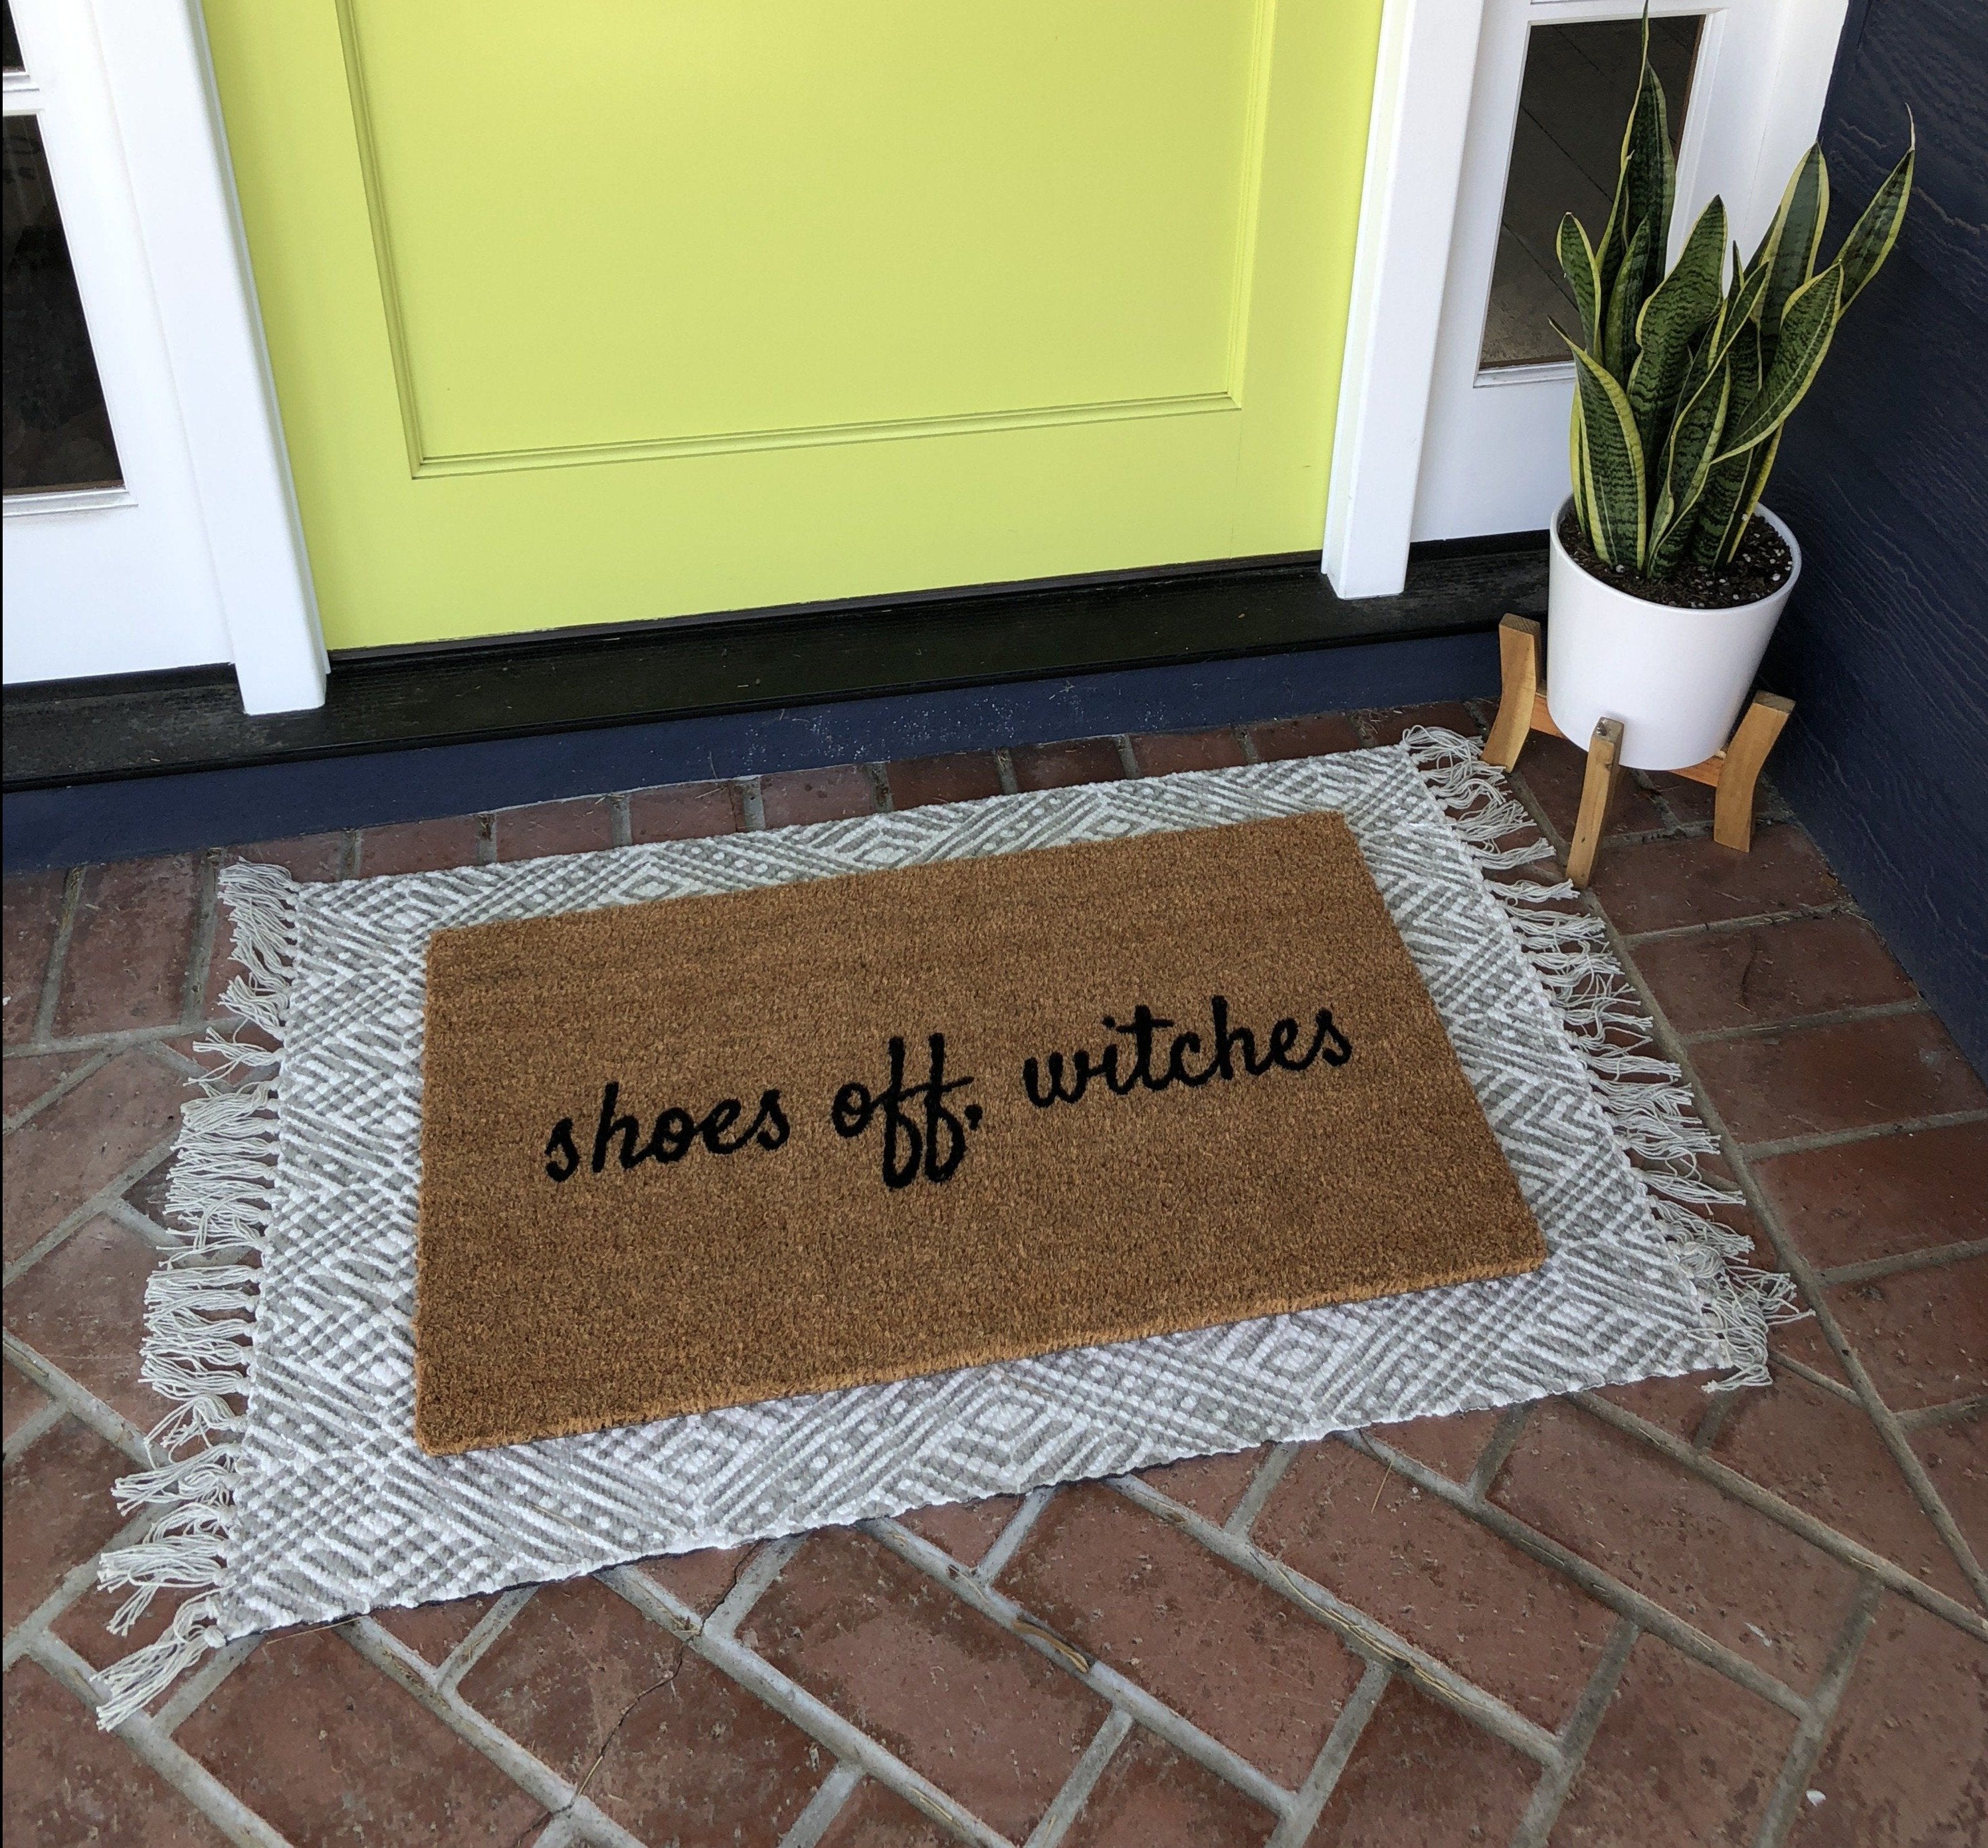 Syncfun Halloween Decoration 30 x 17 Front Door mat with Witch Shoes  Design